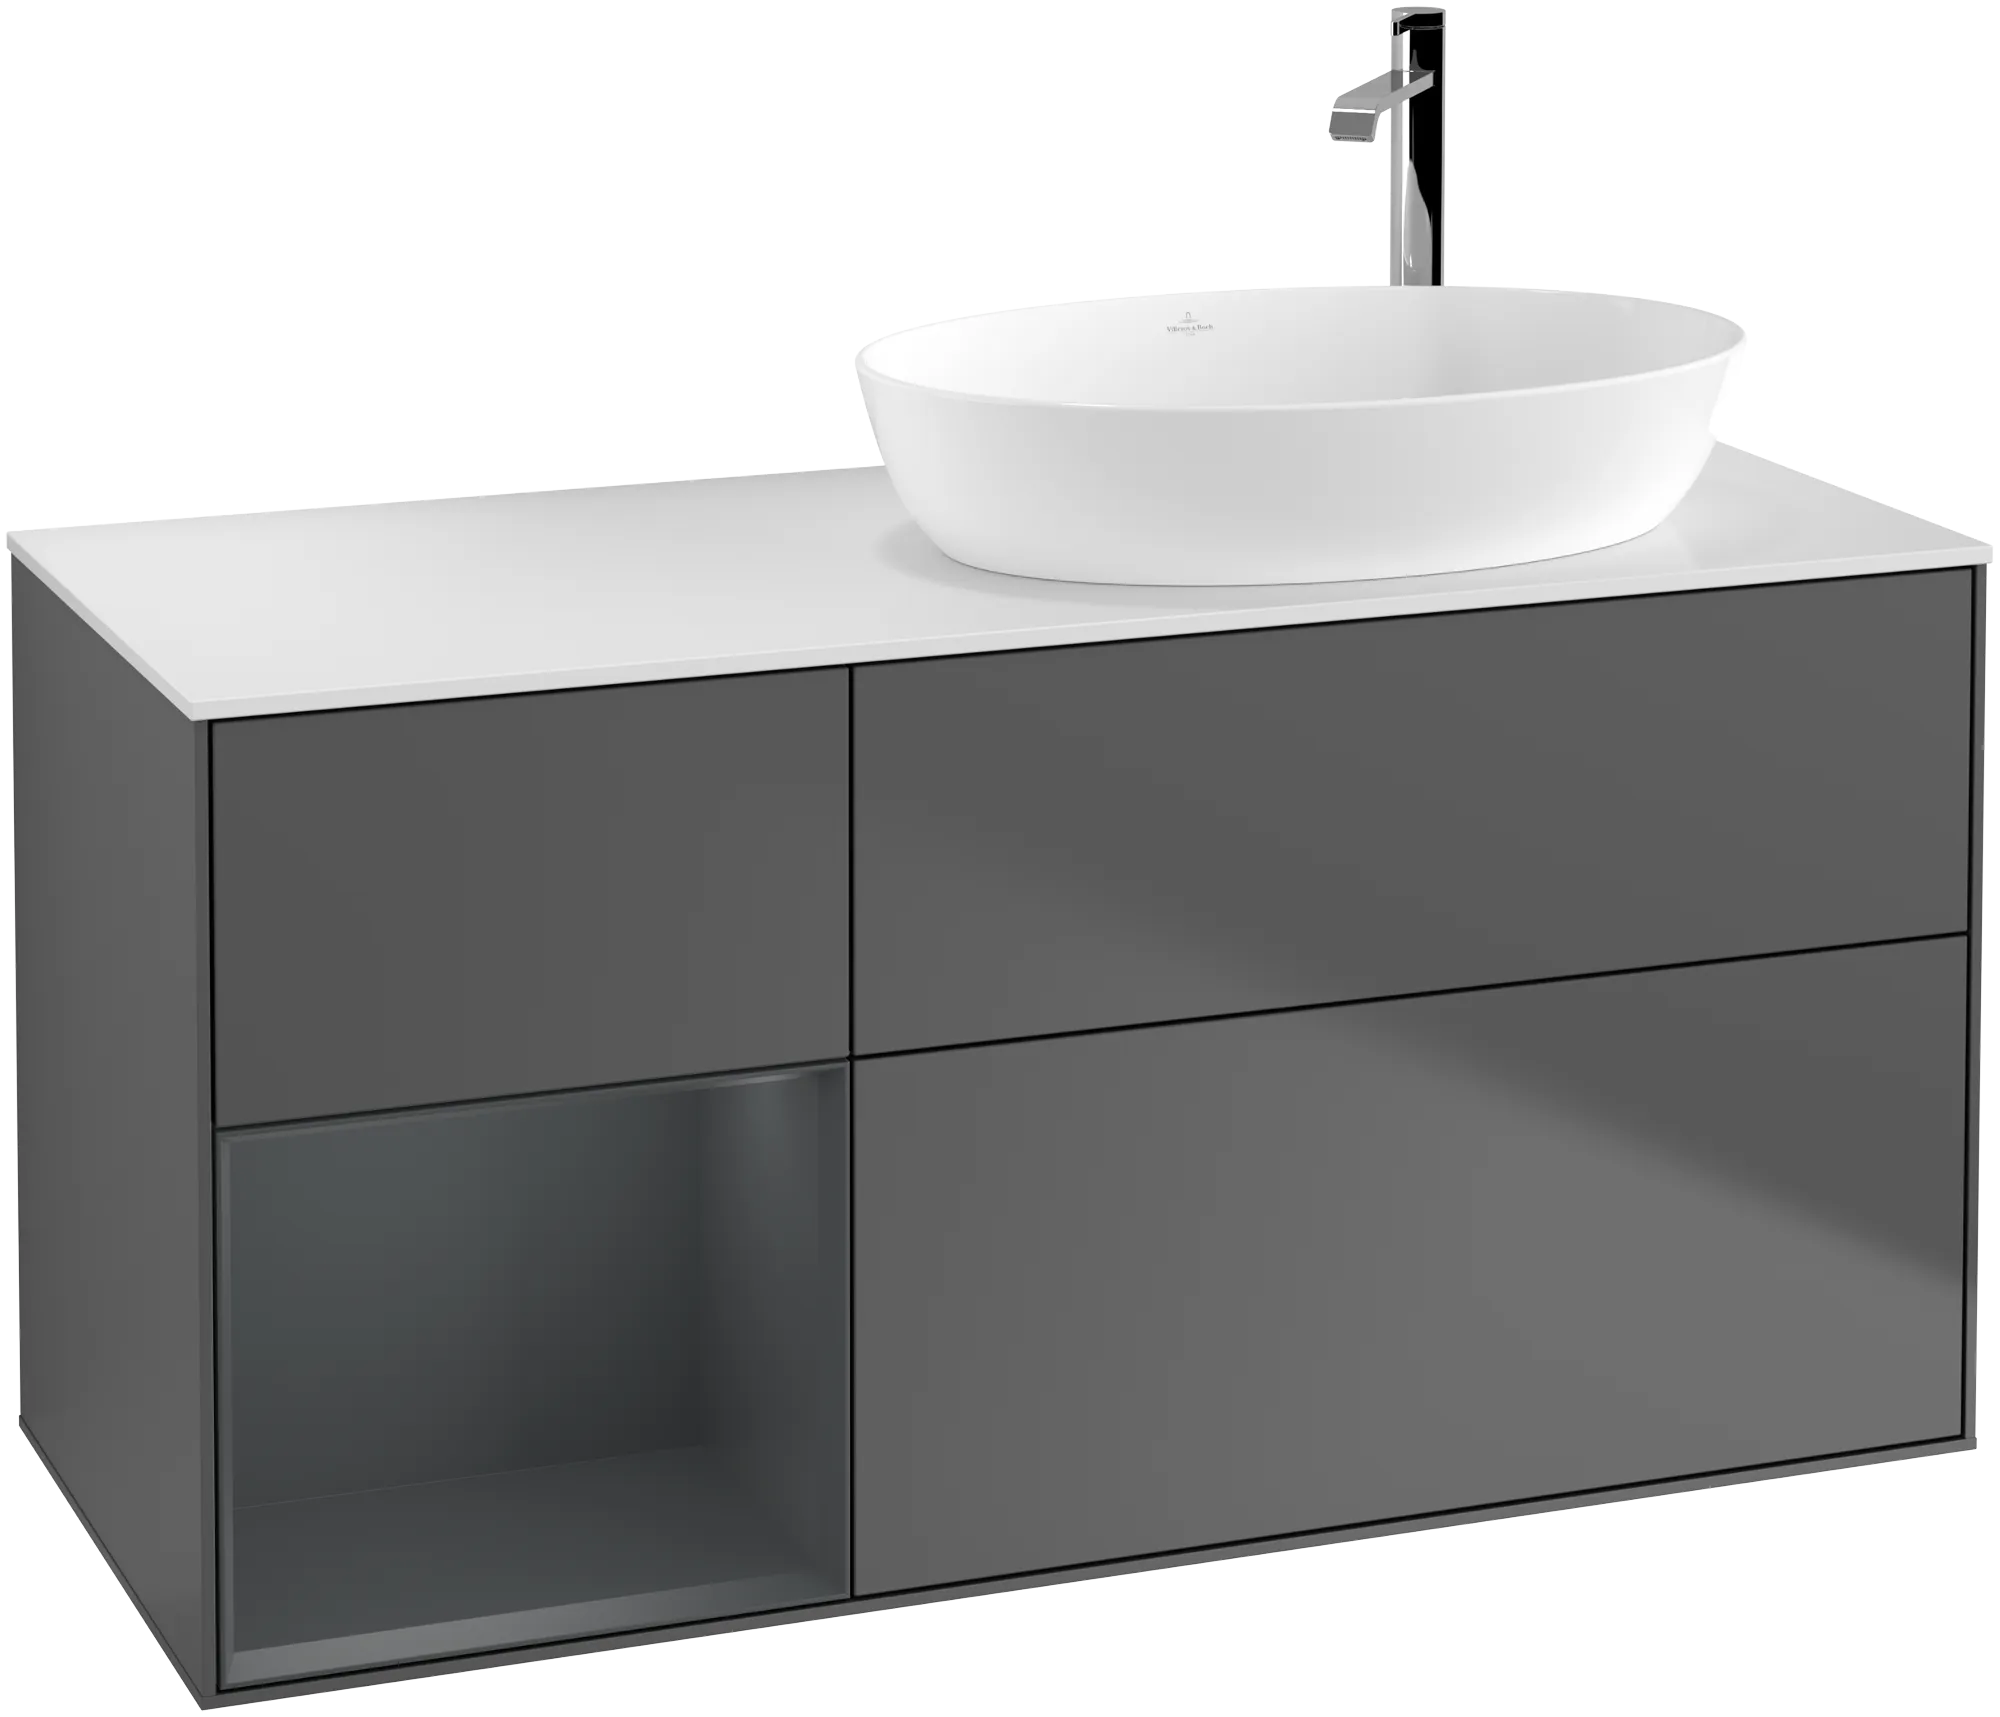 Obrázek VILLEROY BOCH Finion Vanity unit, with lighting, 3 pull-out compartments, 1200 x 603 x 501 mm, Anthracite Matt Lacquer / Midnight Blue Matt Lacquer / Glass White Matt #G921HGGK